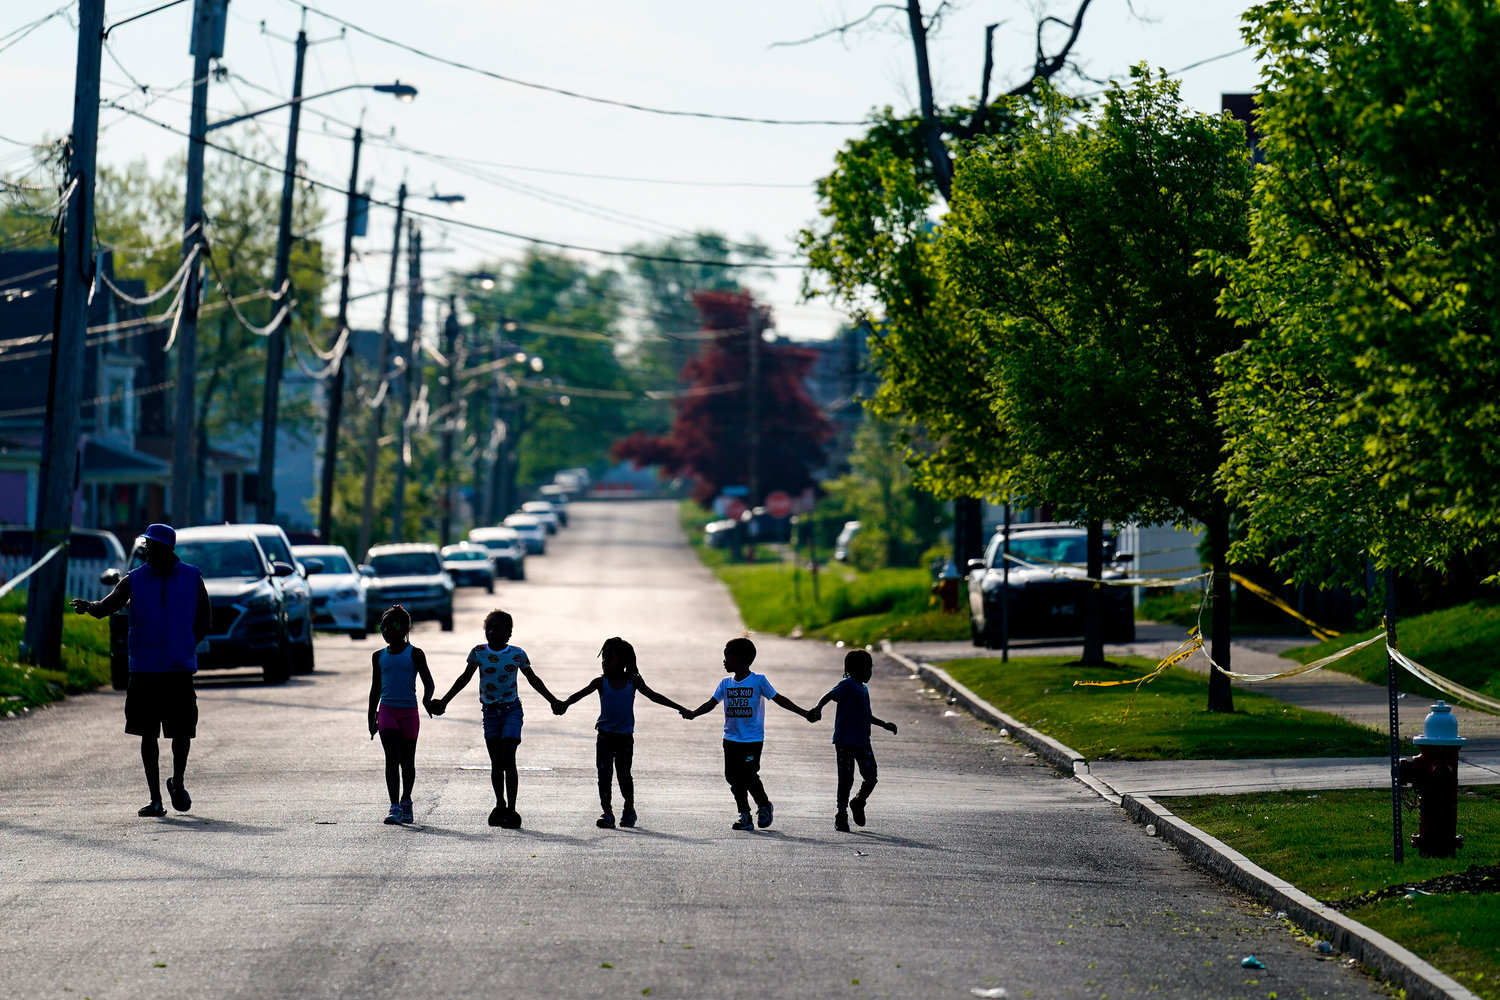 Children walk hand in hand out near the scene of a shooting at a supermarket in Buffalo, N.Y., Sunday, May 15, 2022. (AP Photo/Matt Rourke)